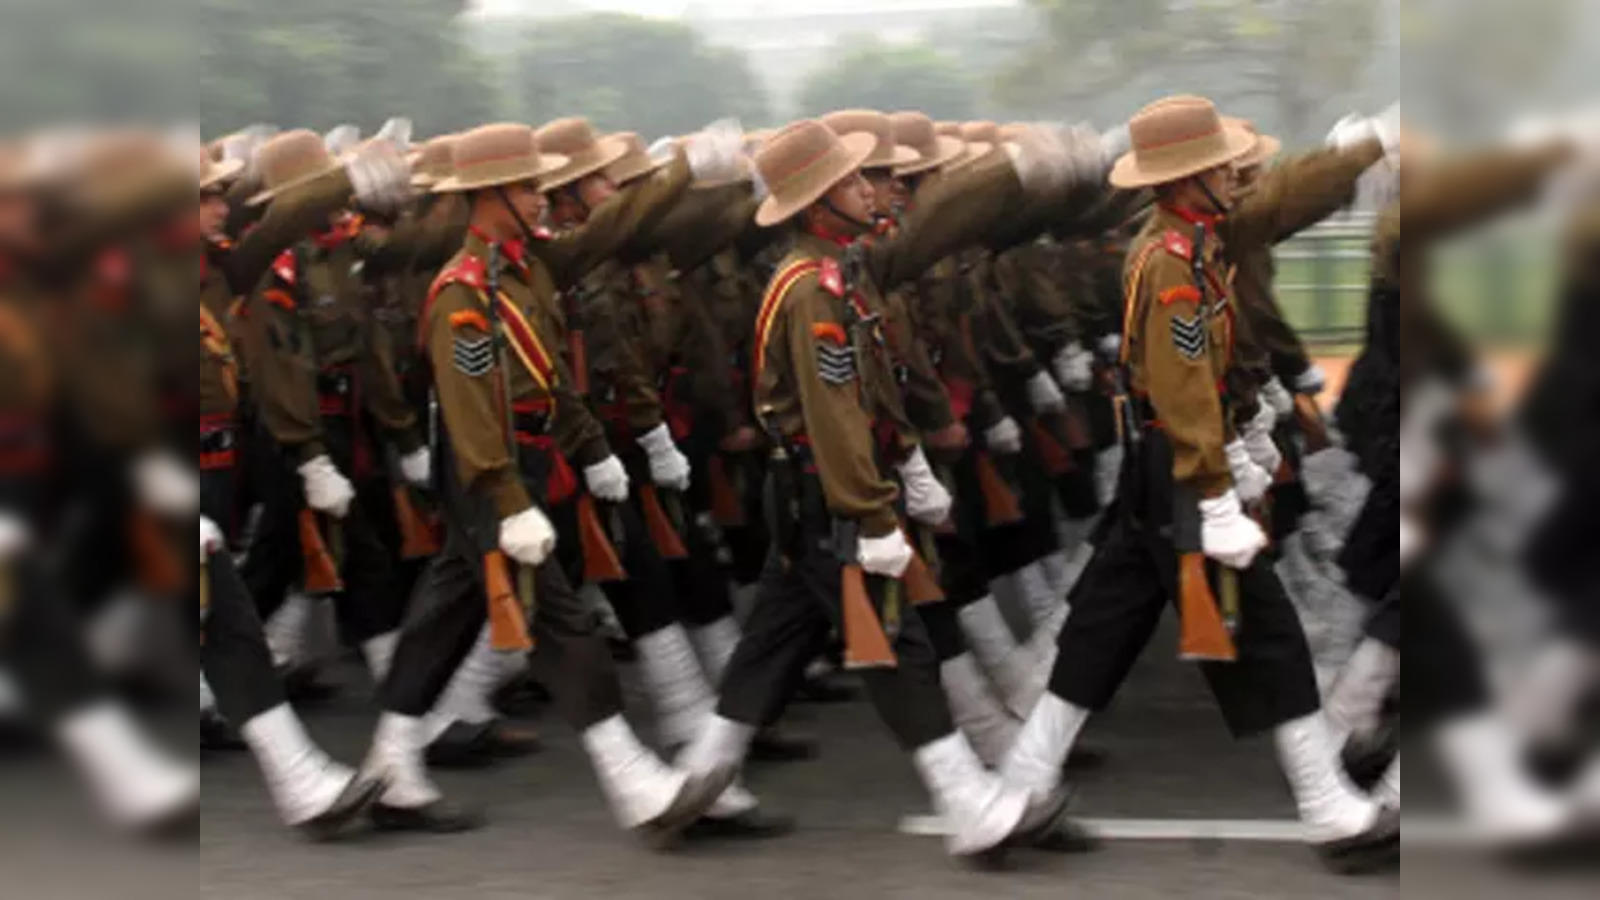 Army Day 2022: Indian Army unveils new combat uniform suitable for